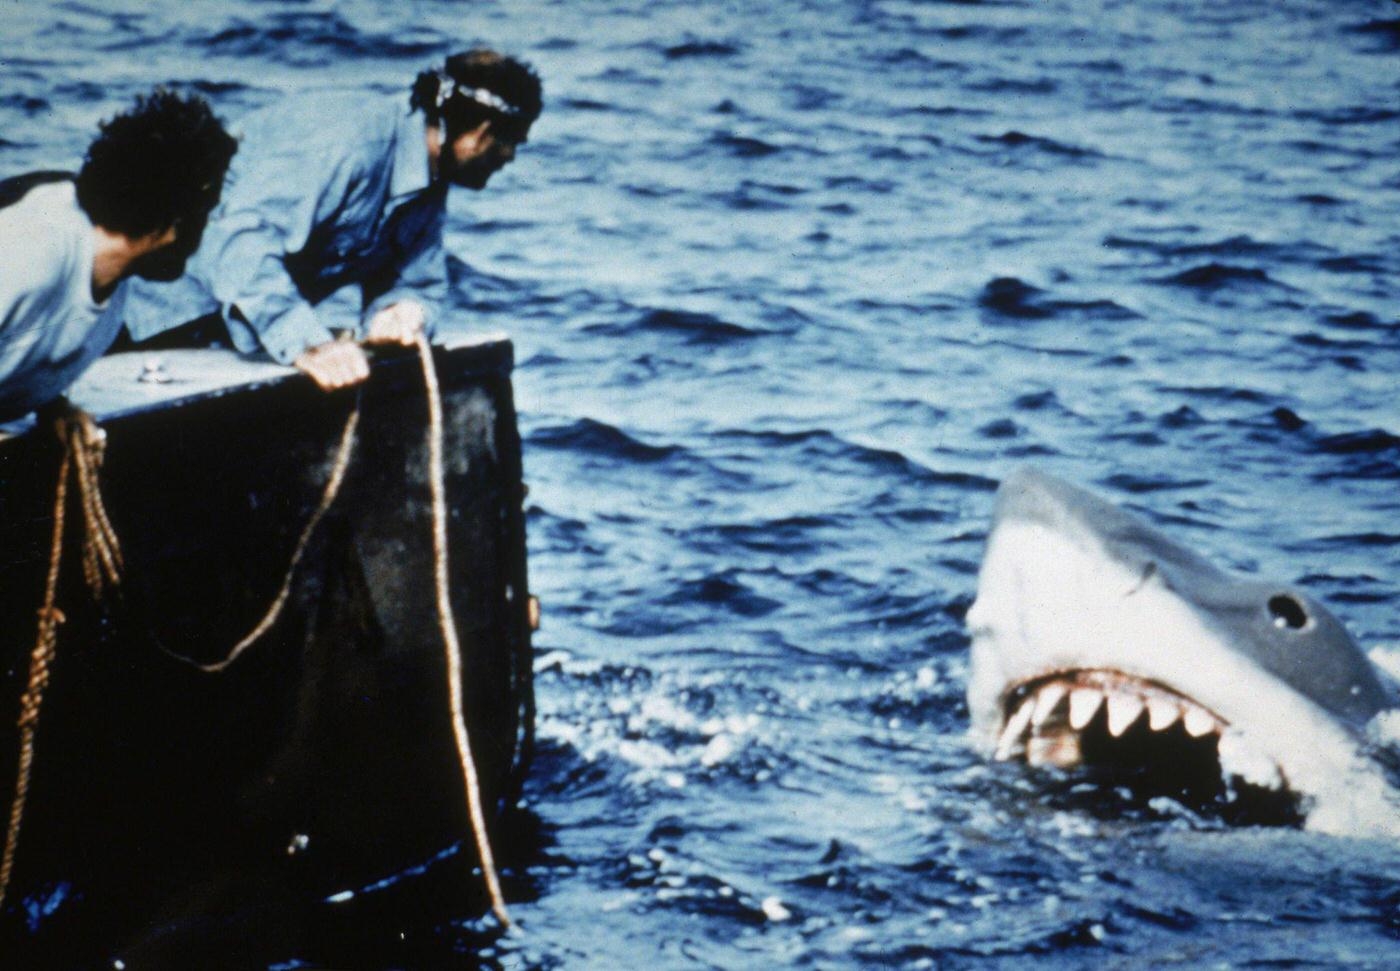 Richard Dreyfuss and Robert Shaw lean off the back of their boat, holding ropes as they watch the giant Great White shark emerge from the water in a still from the film, 'Jaws,' 1975